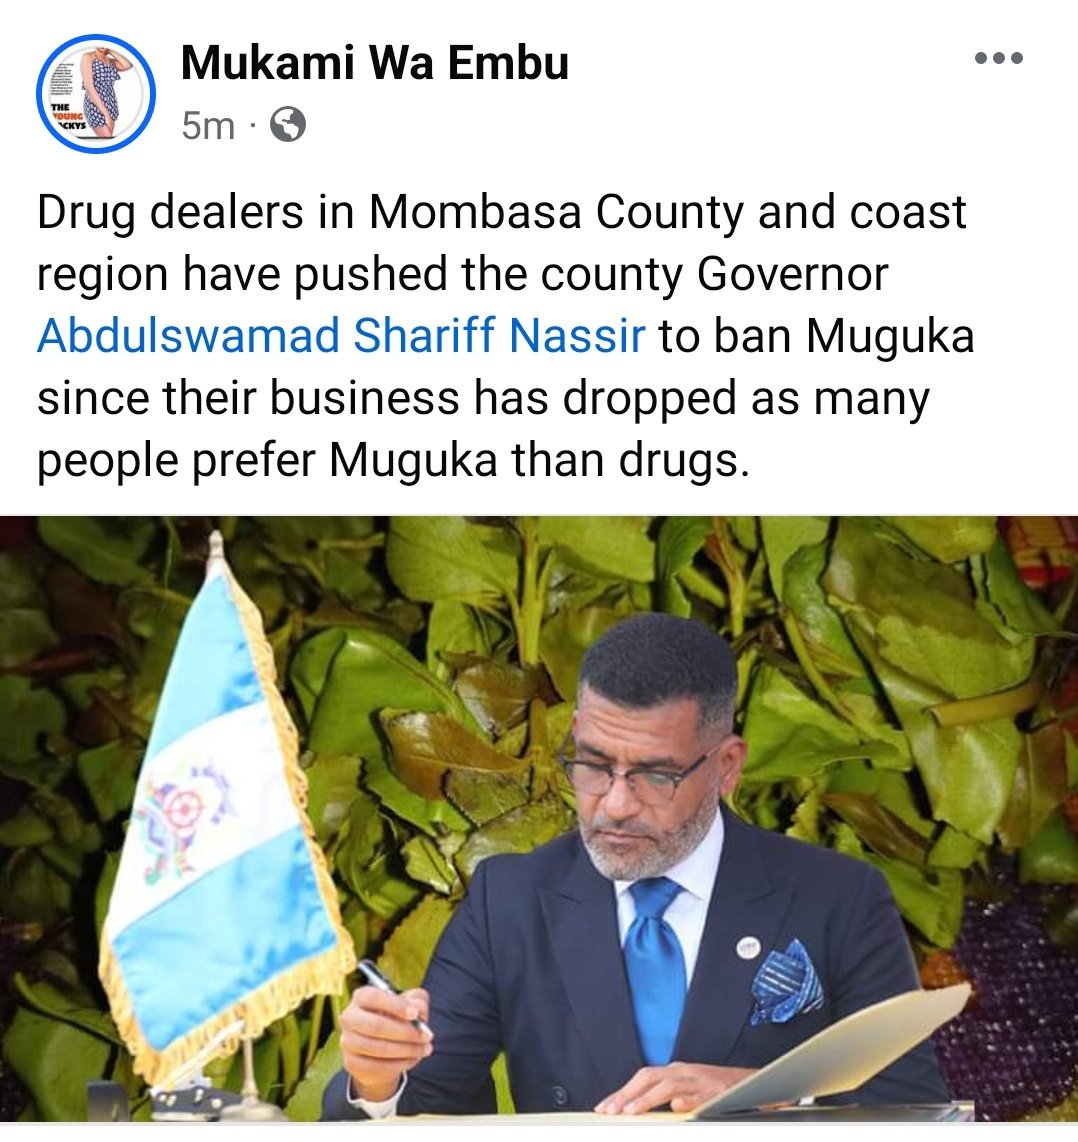 Drug dealers in Mombasa County and the coast region have pushed the county Governor @A_S_Nassir to ban Muguka since their business has dropped as many people prefer Muguka than drugs.